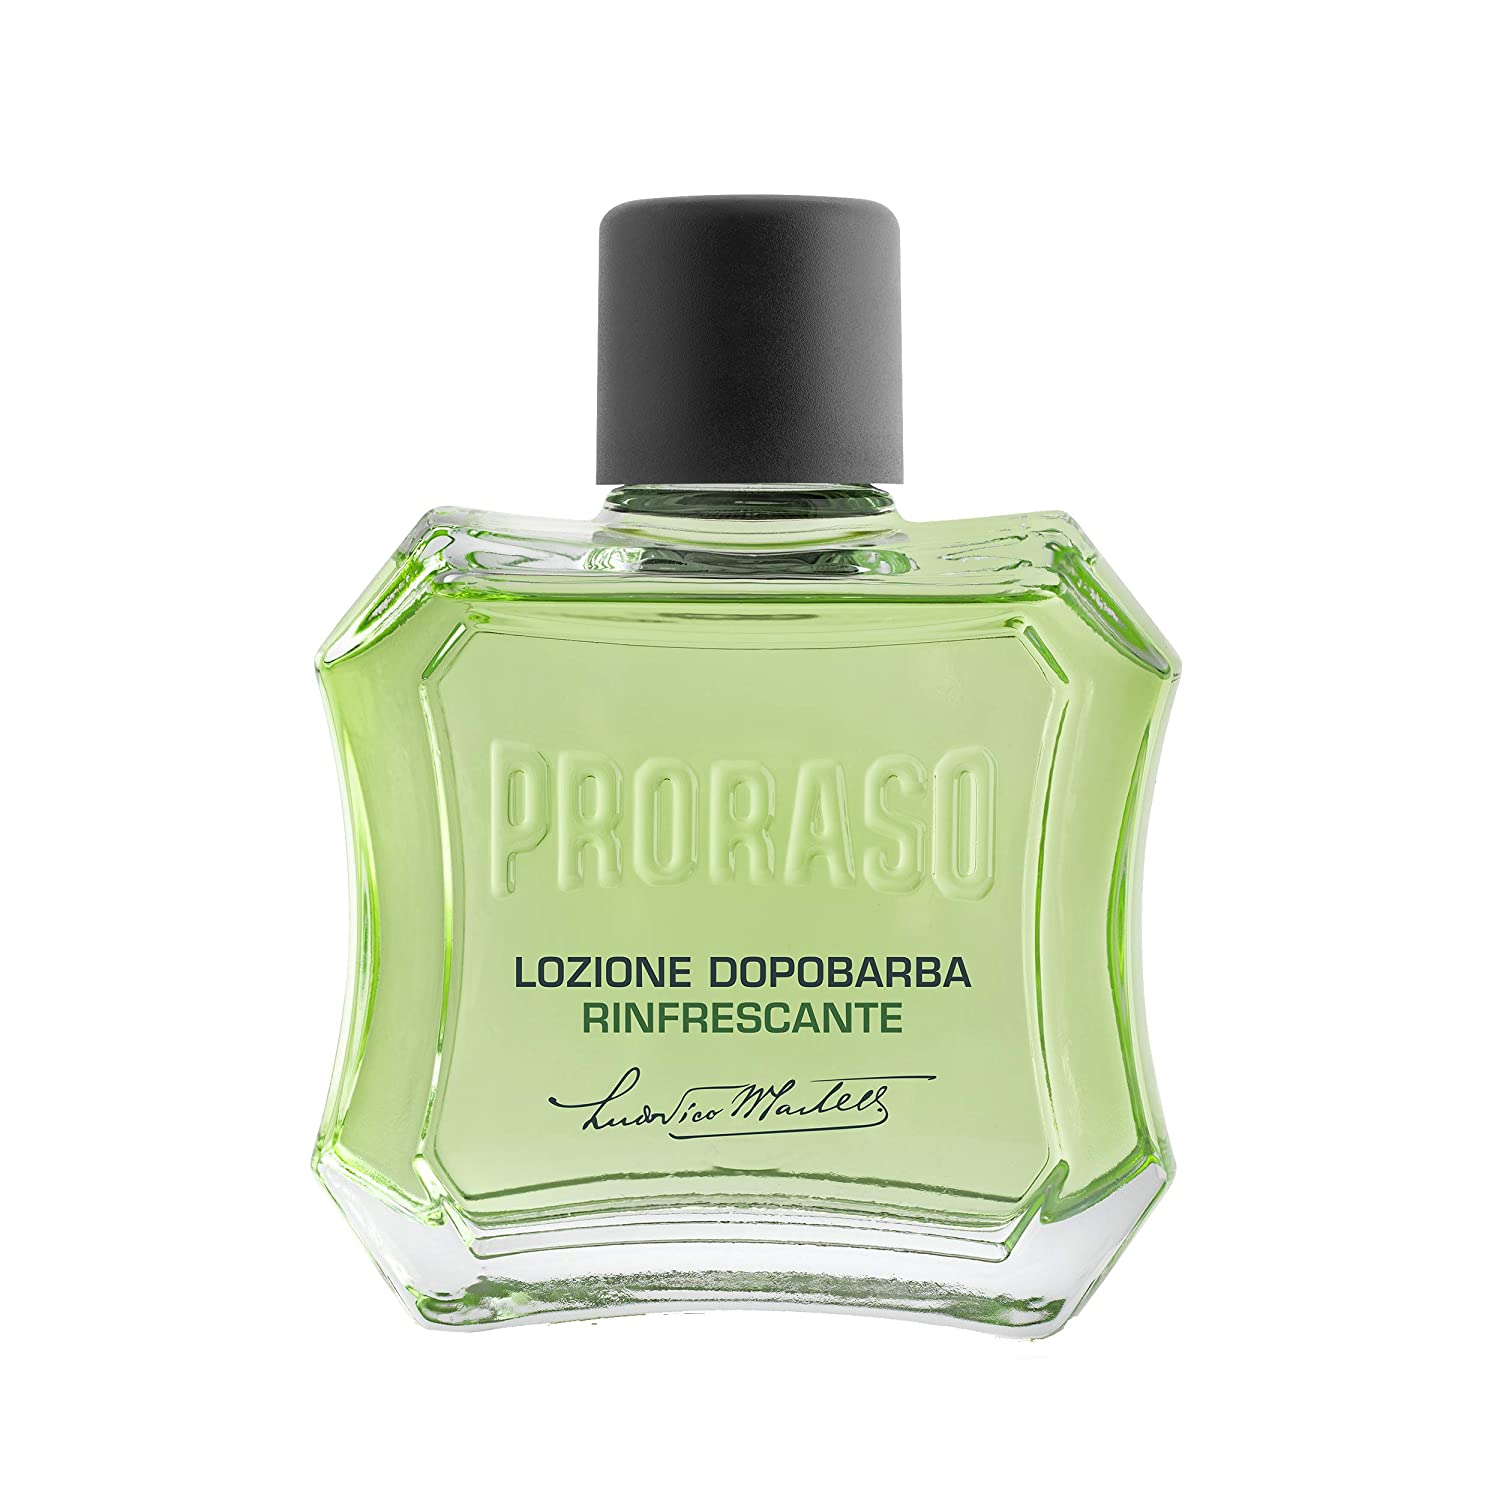 Proraso’s After Shave Lotion